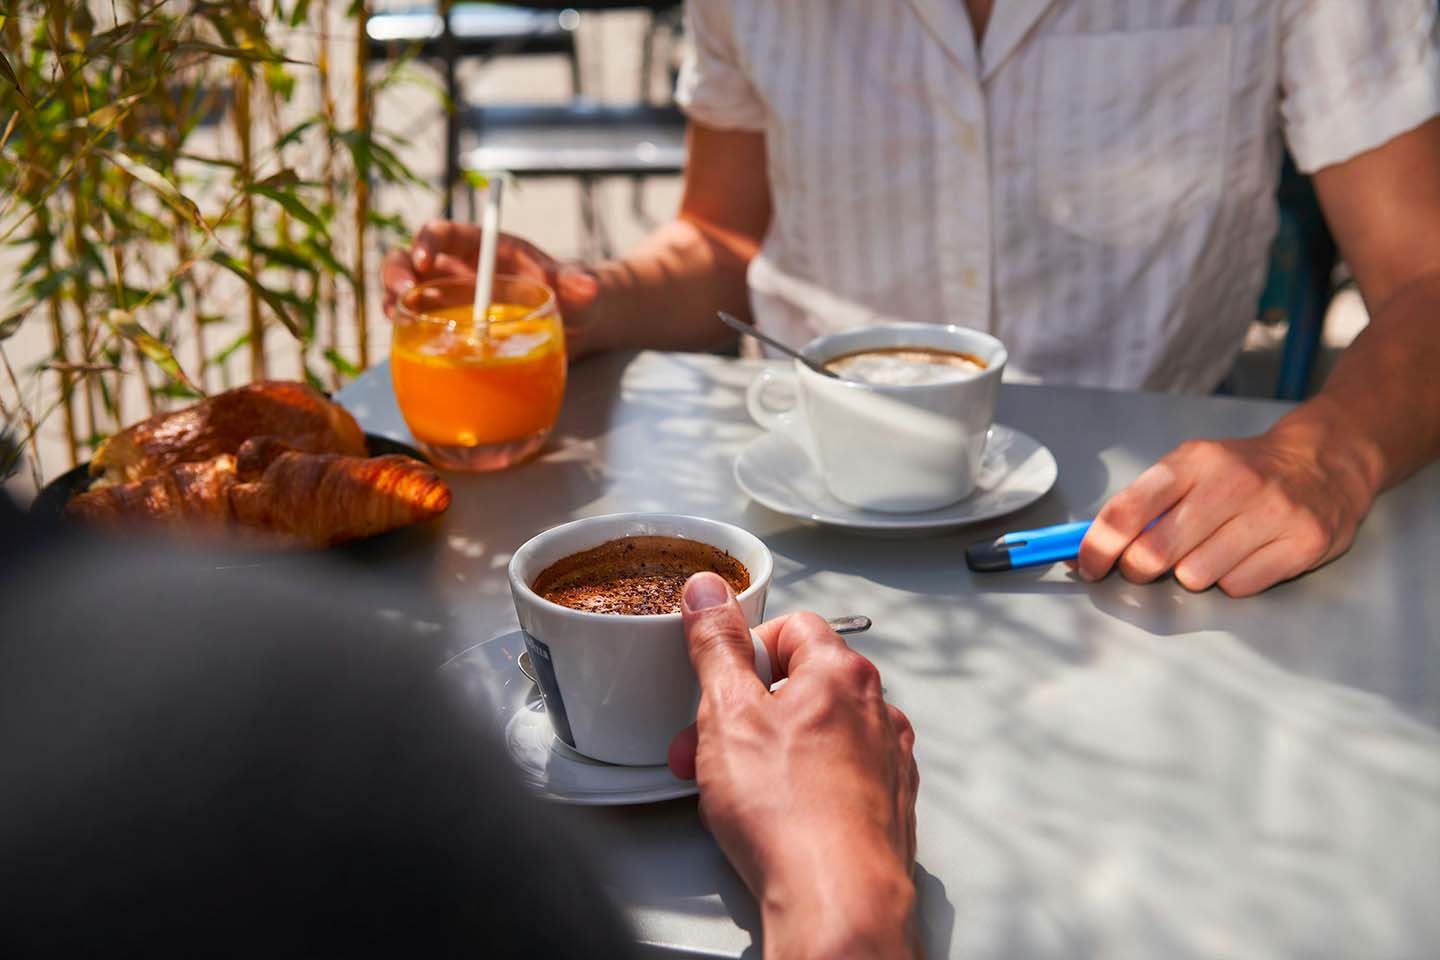 Two people sitting at an outdoor cafe table drinking coffee, one with a vape in hand